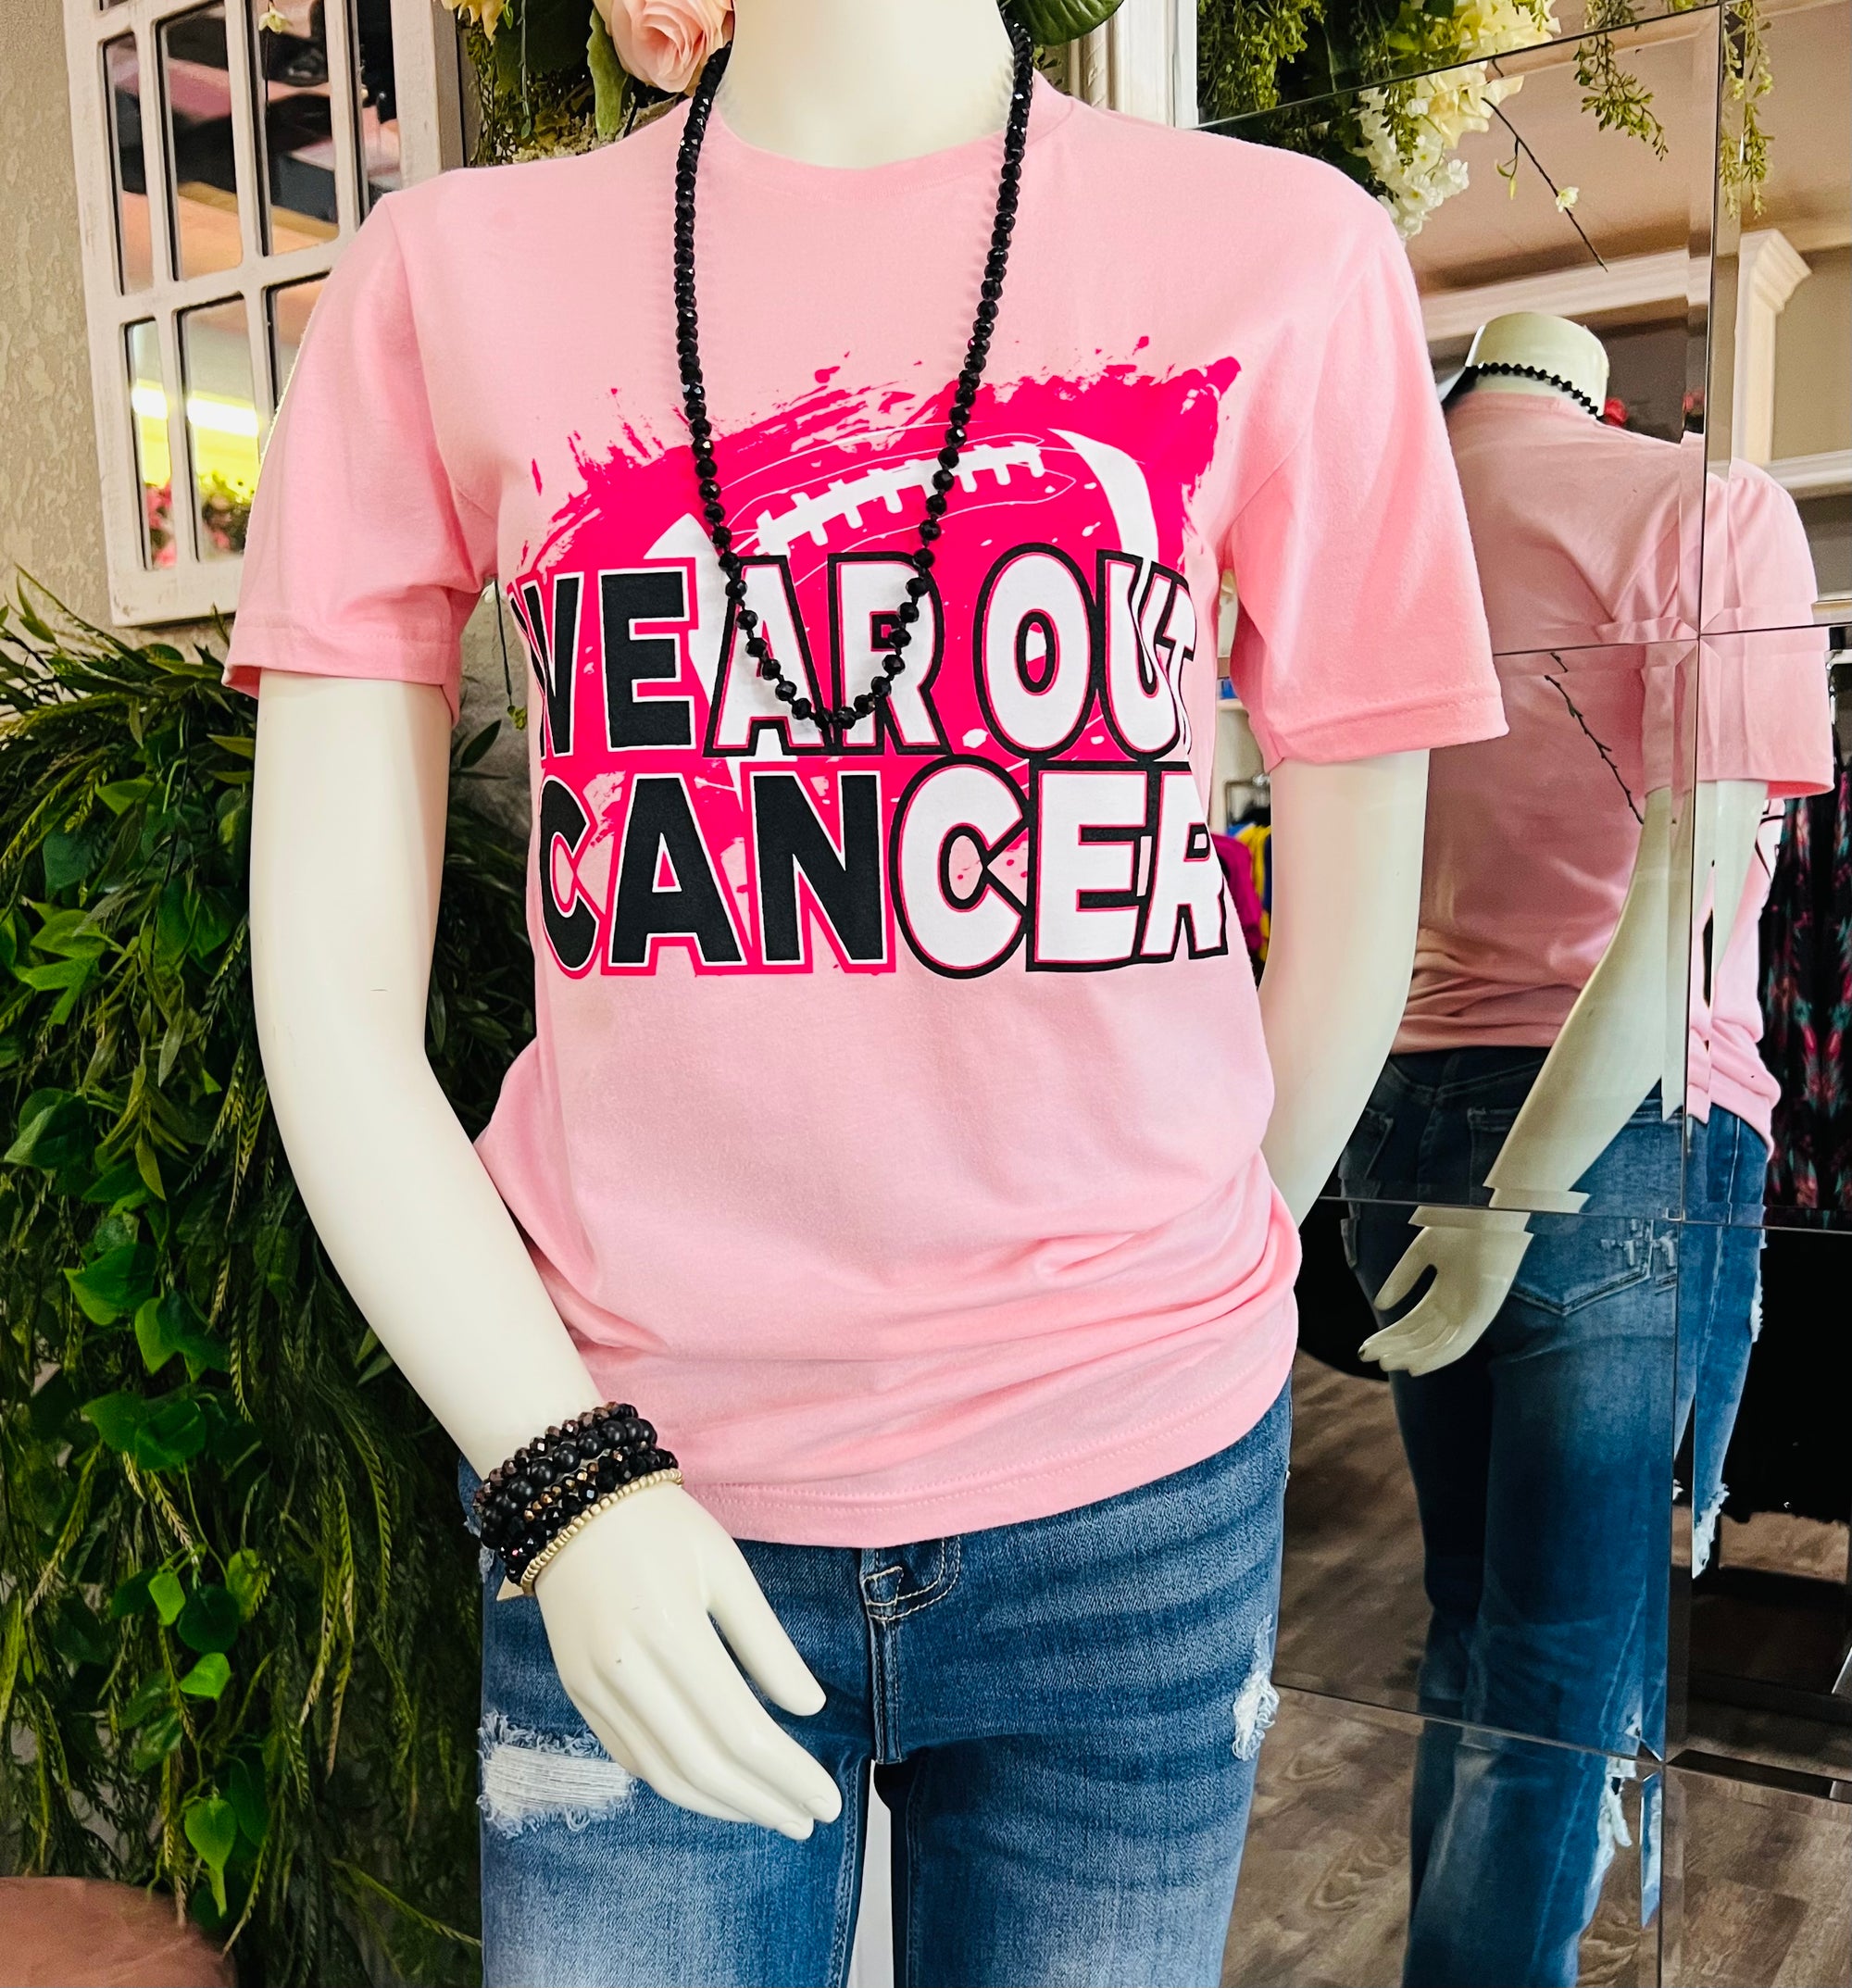 We Can Wear Out Cancer